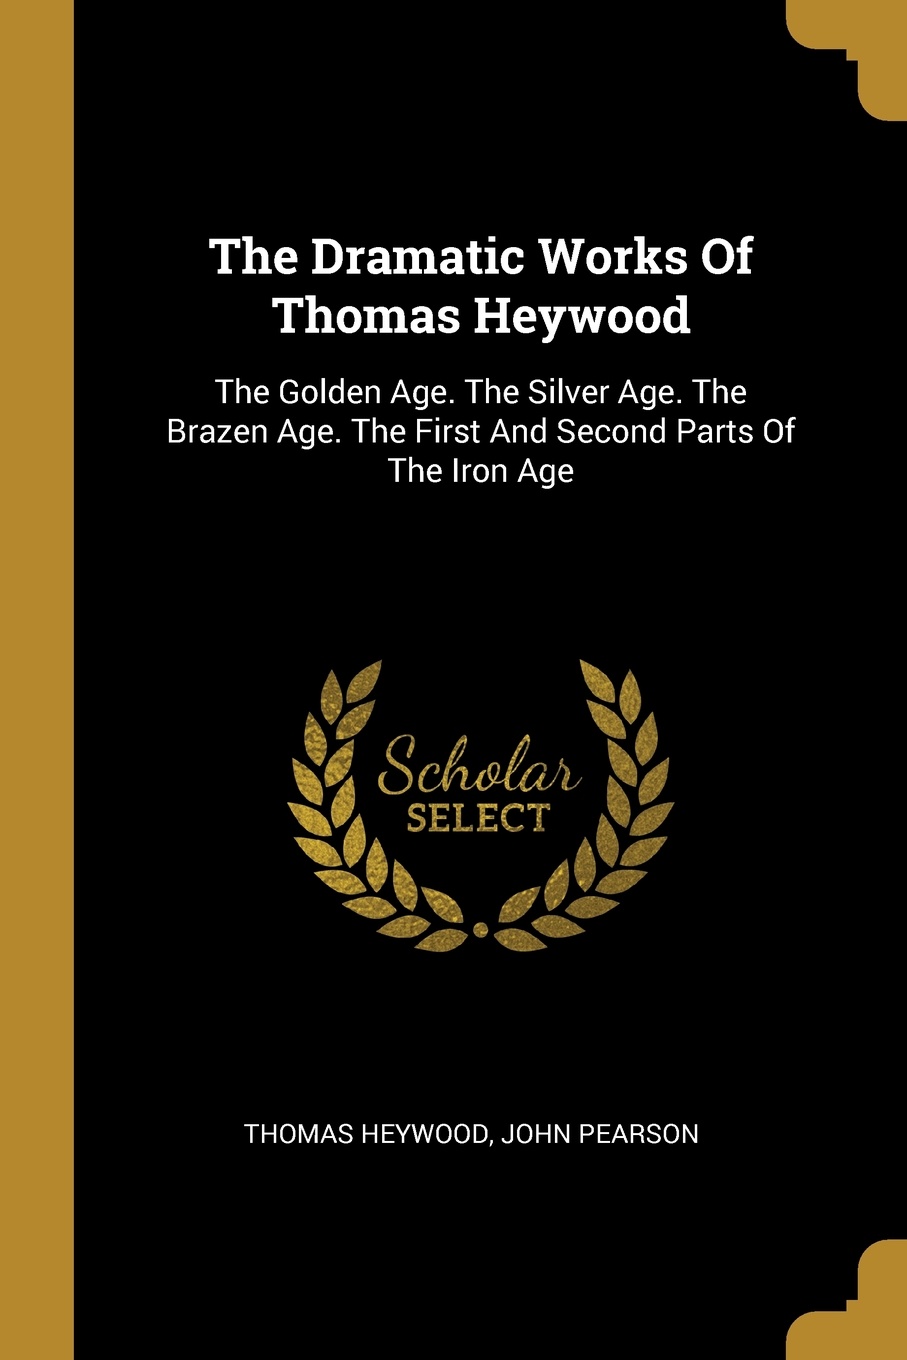 The Dramatic Works Of Thomas Heywood. The Golden Age. The Silver Age. The Brazen Age. The First And Second Parts Of The Iron Age